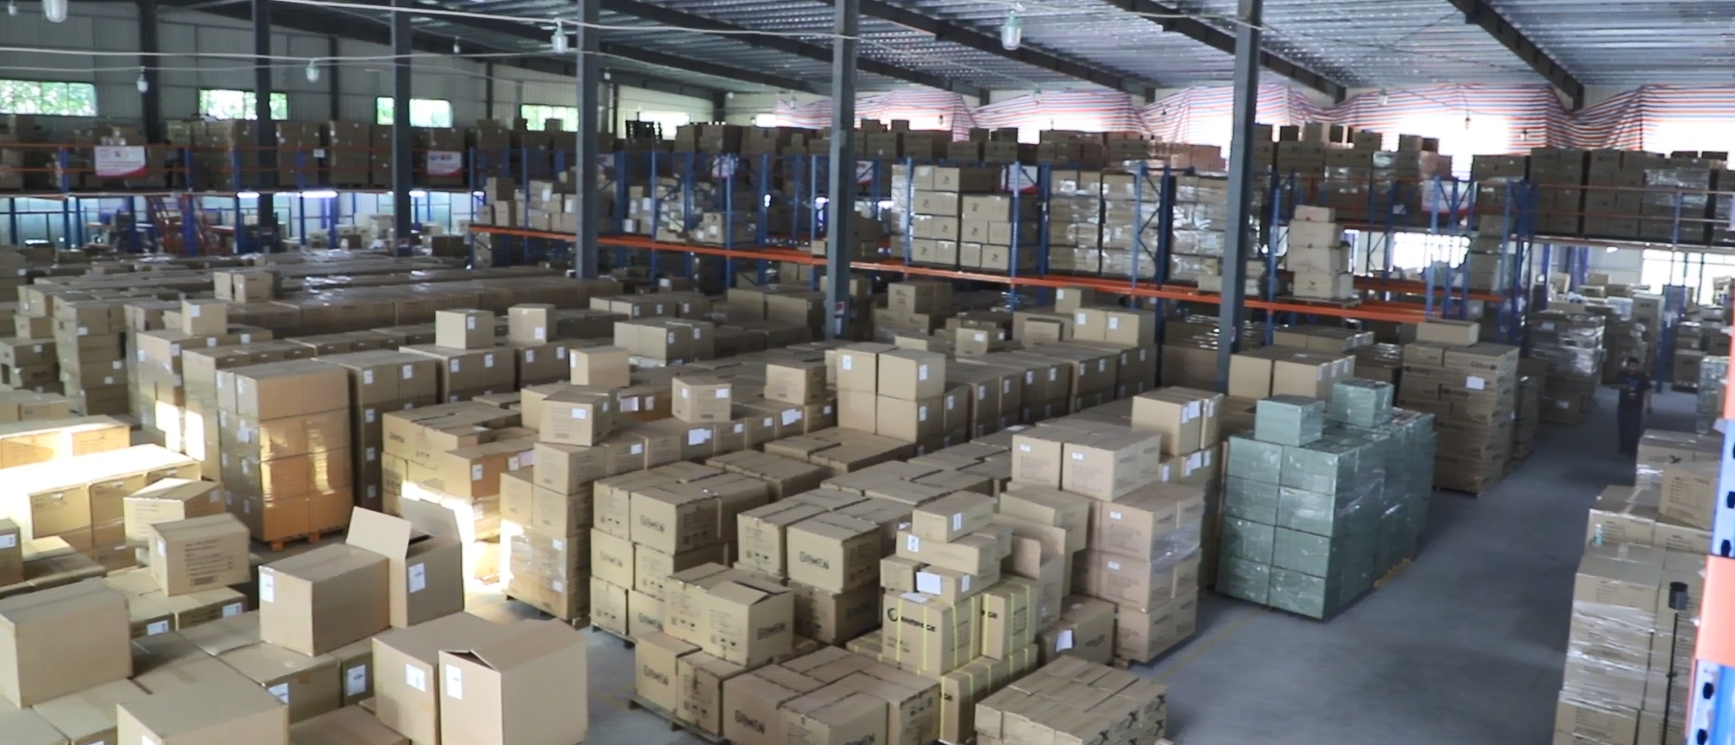 China Phone, Tablet, Laptop, Computer Accessories & Electronic Gadgets Wholesale, Factory.